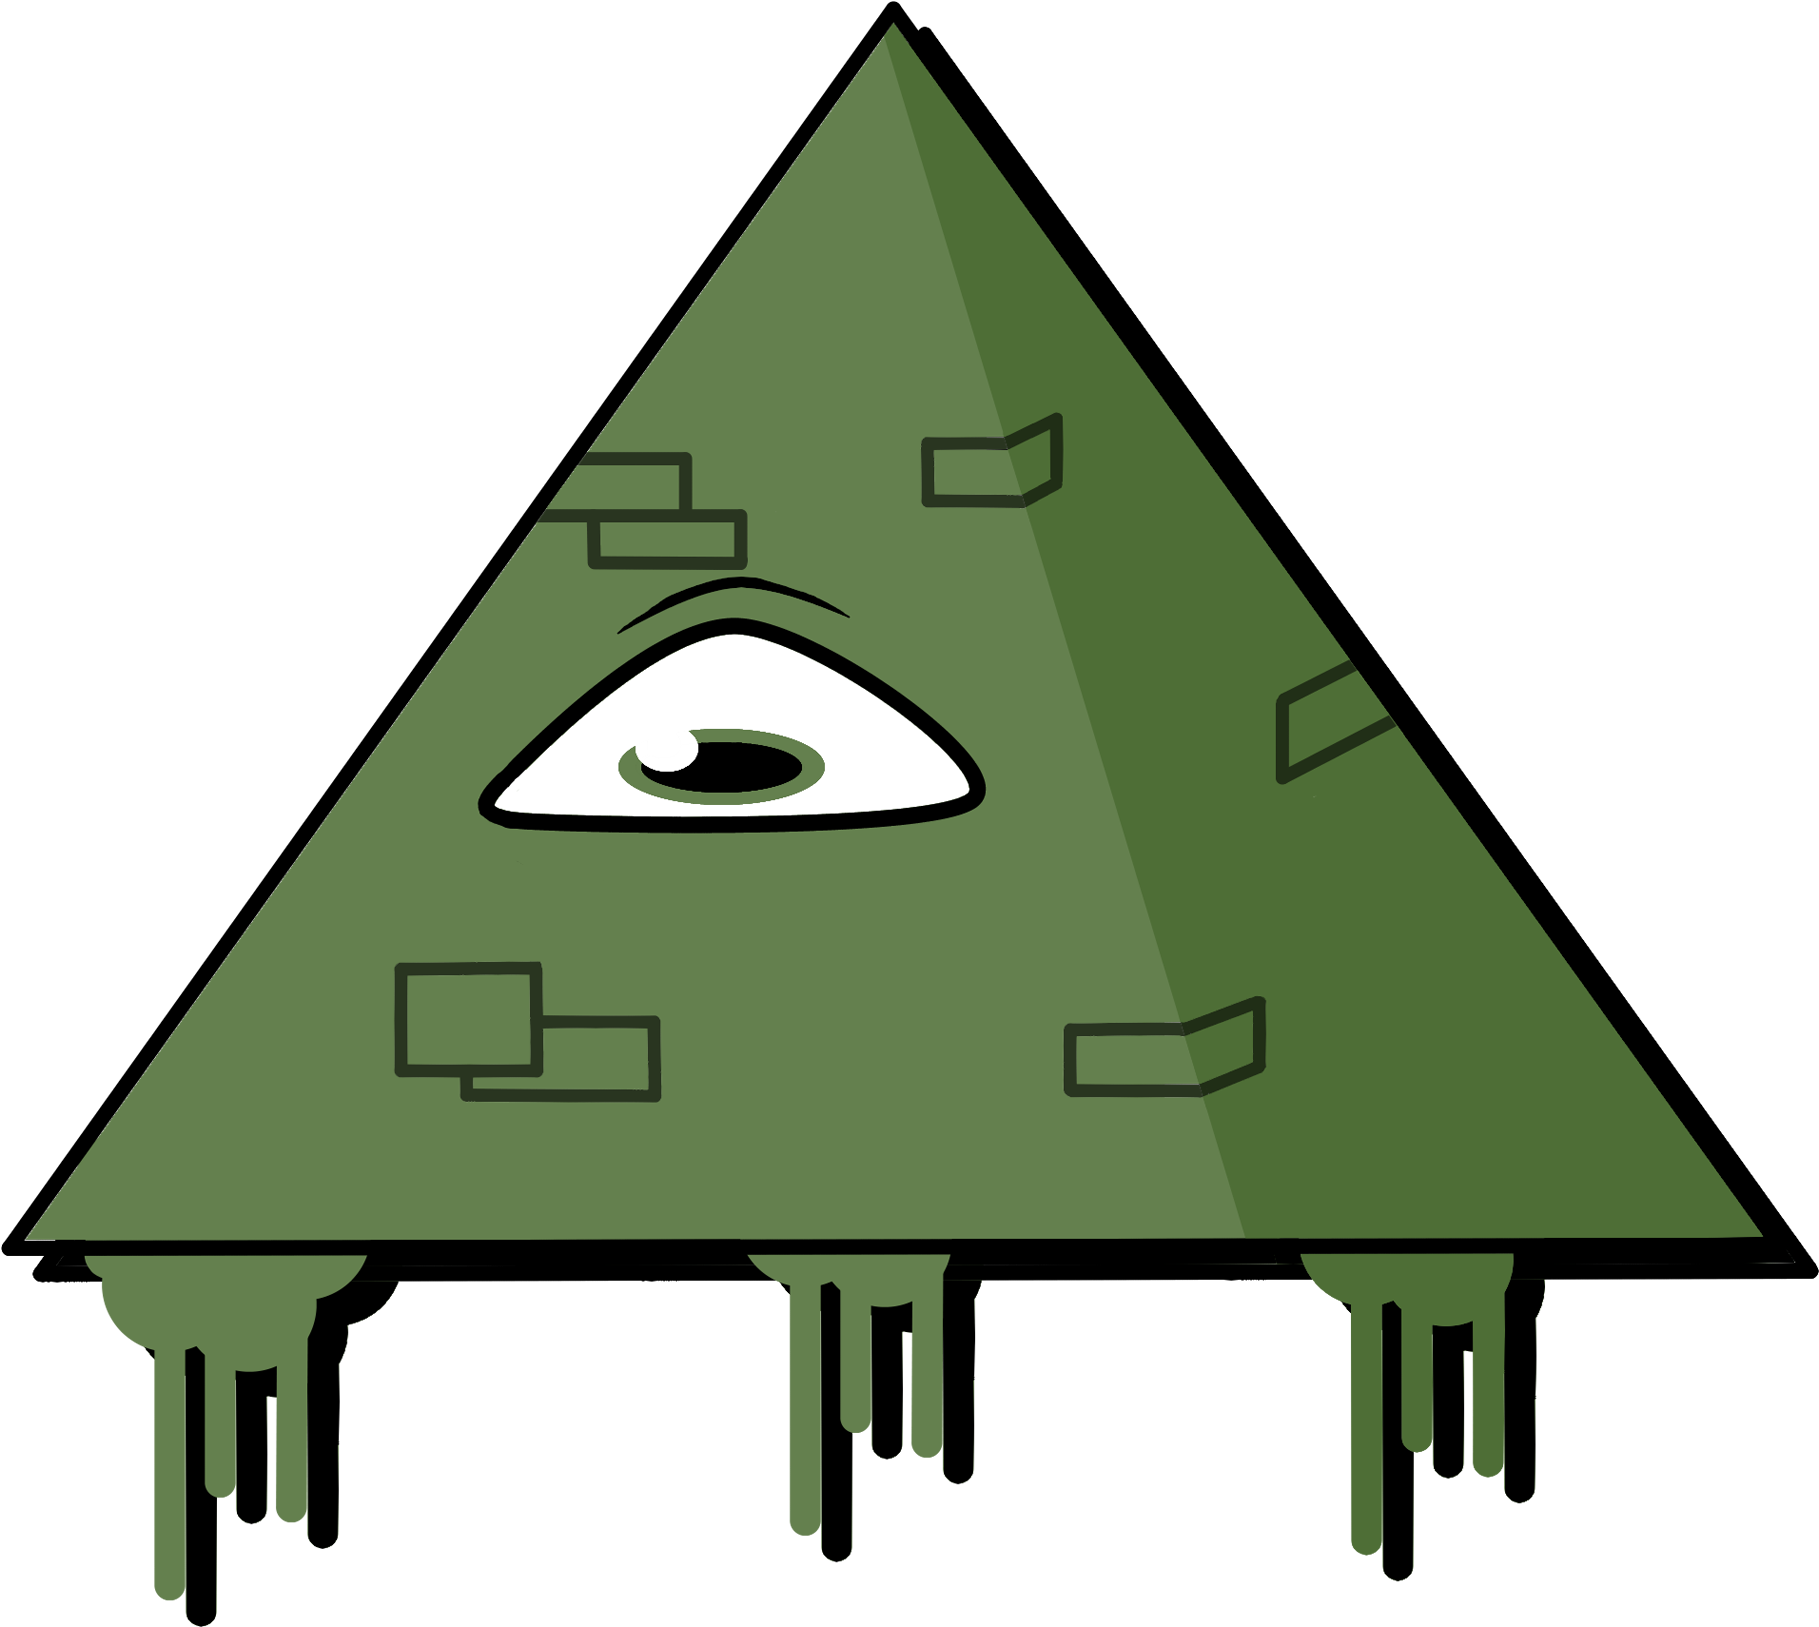 Green Triangle With Eye Illustration PNG image